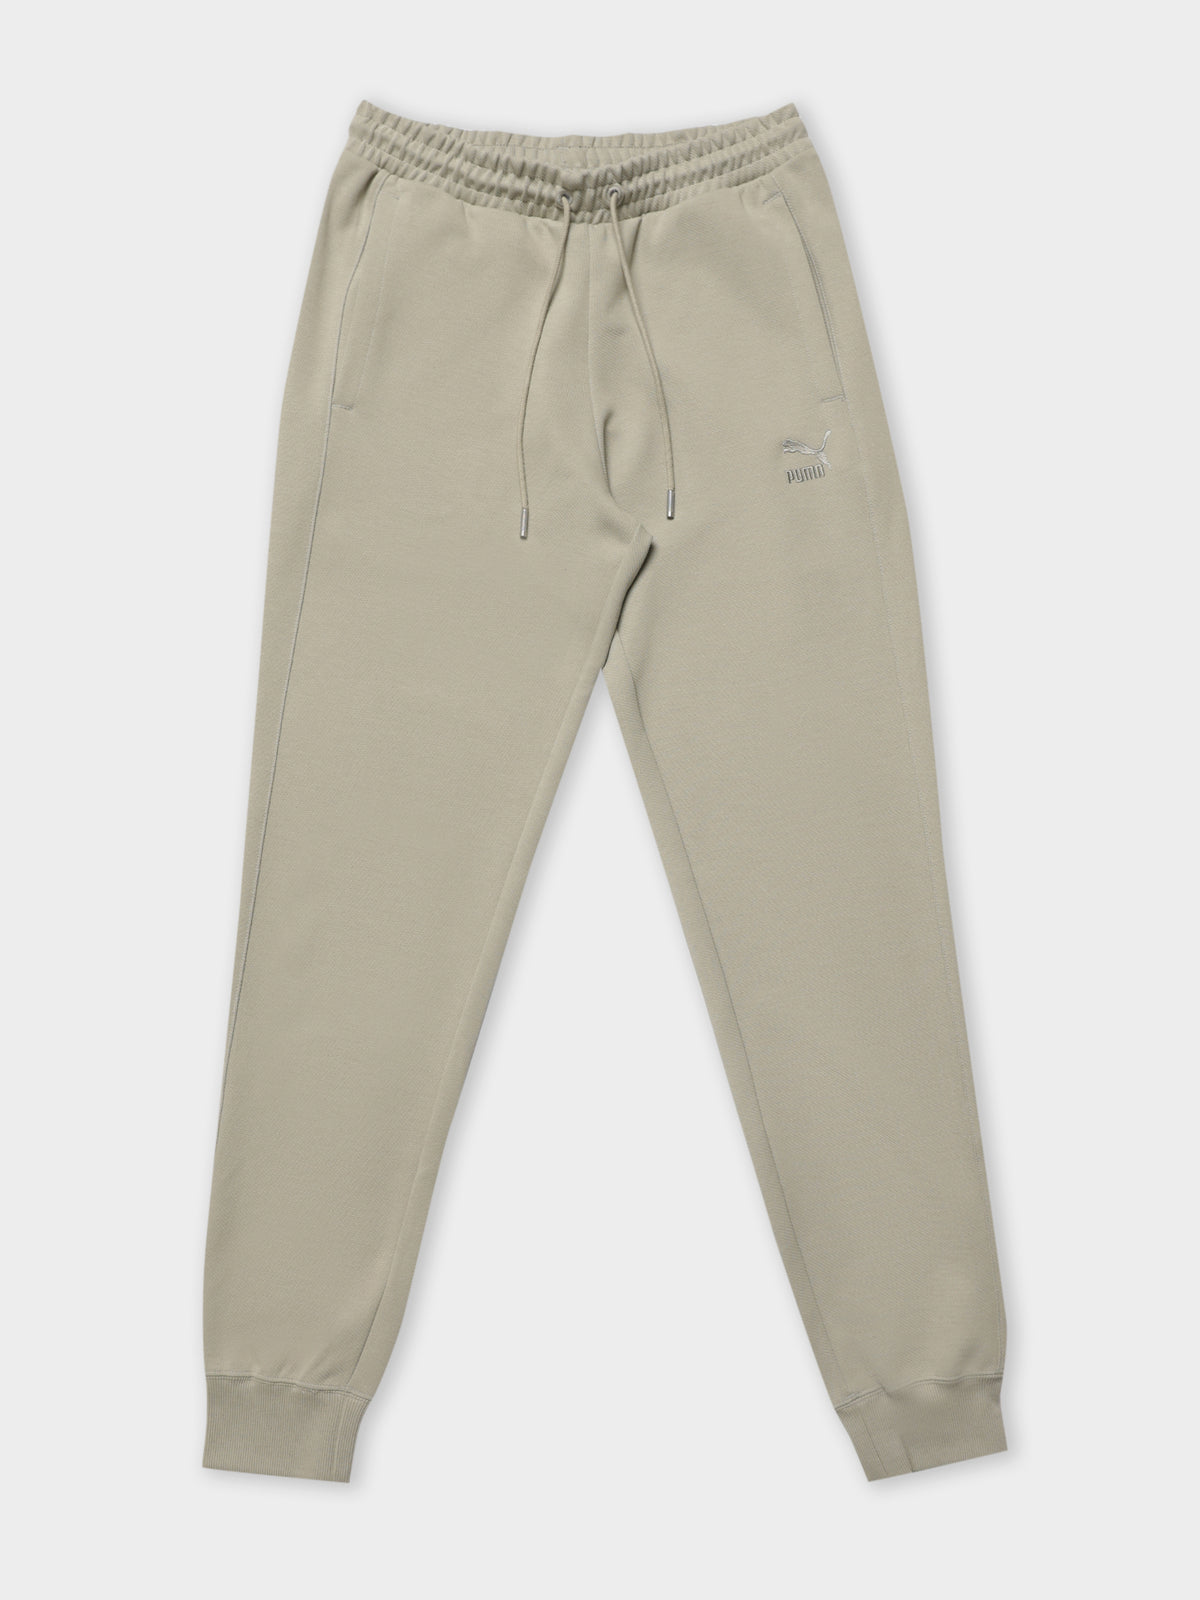 T7 Track Pants in Pebble Grey